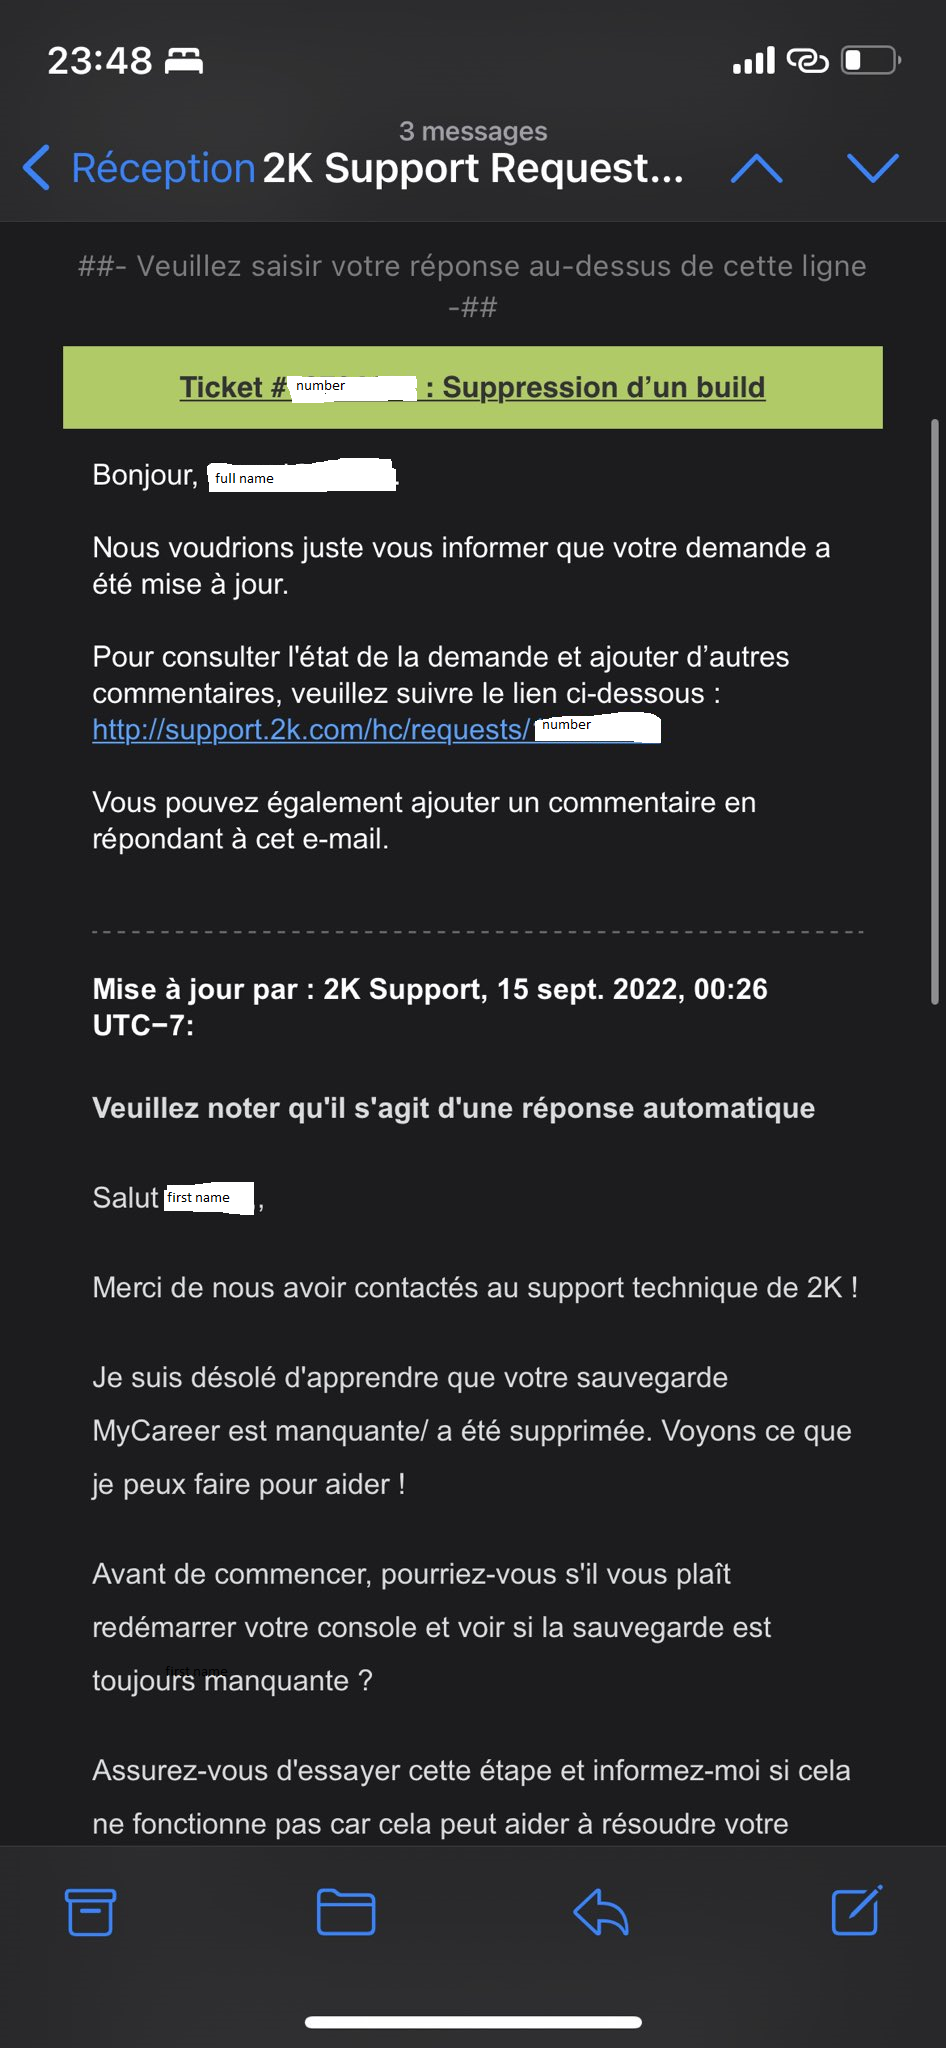 2k support email type 1